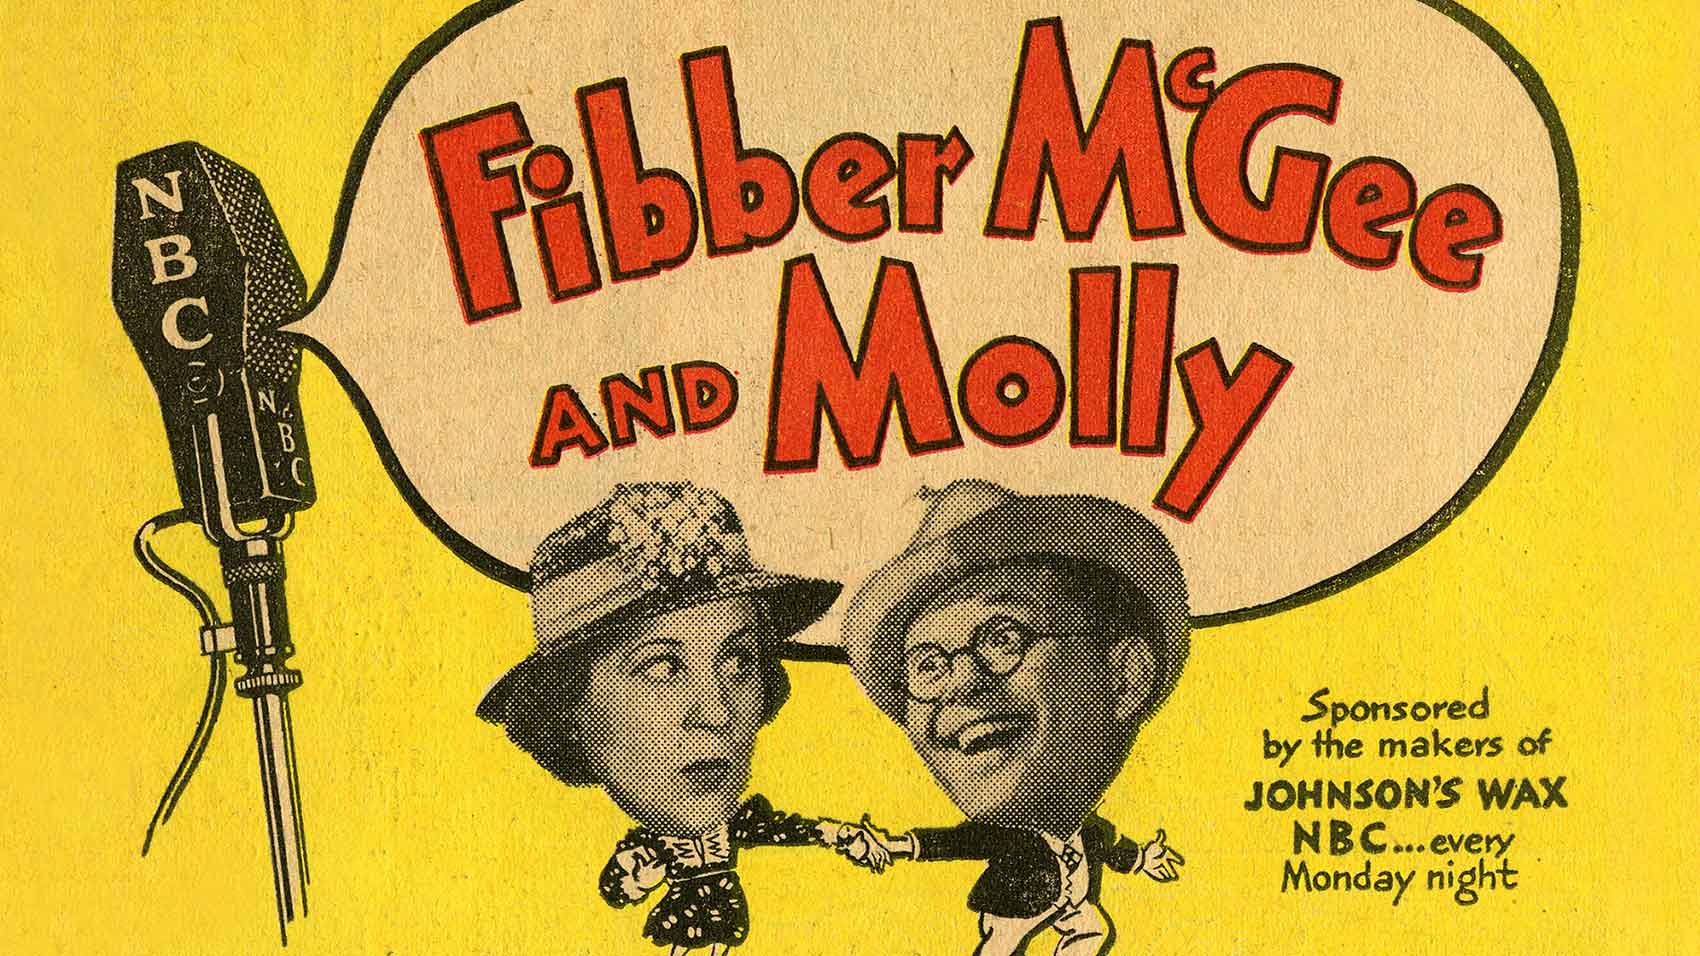 The comedy classic “Fibber McGee and Molly” old time radio ad. 